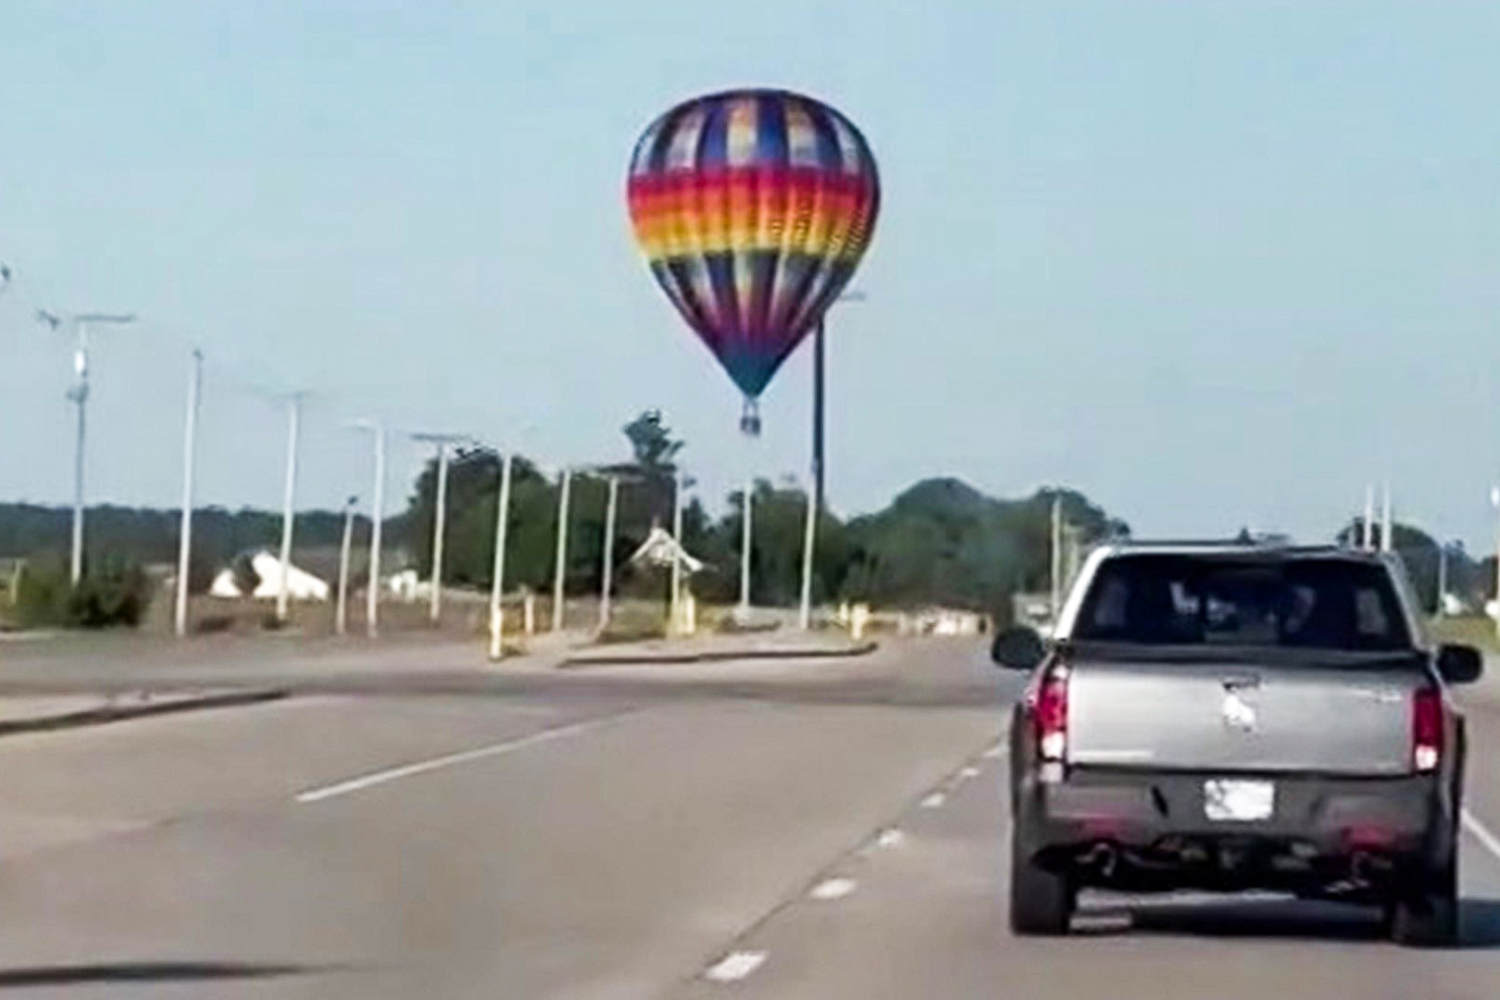 3 people in hot air balloon hospitalized with serious electrical injuries after passing power lines